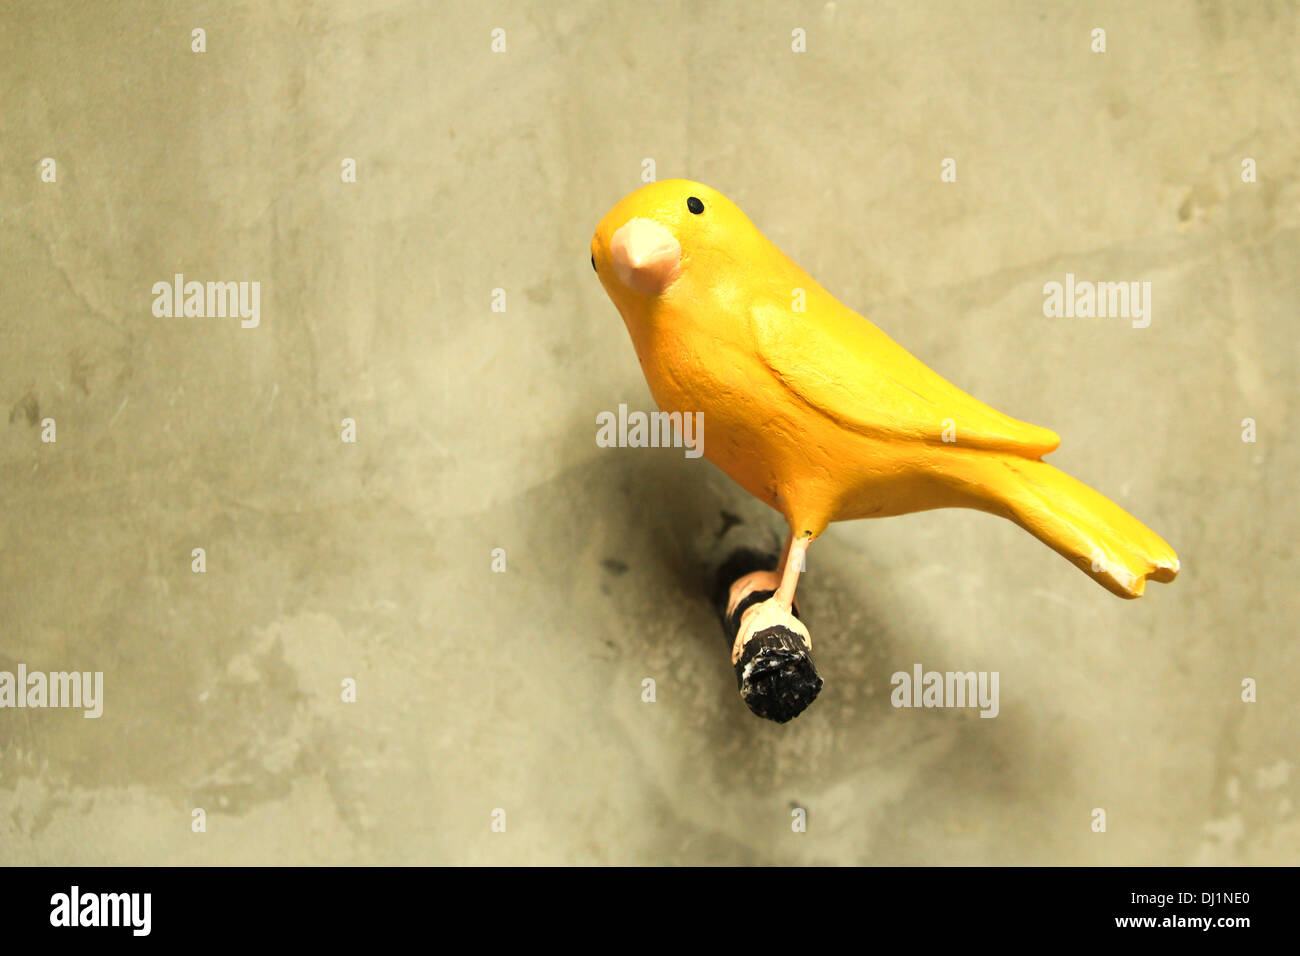 Bird sculpture colorful on wall Stock Photo